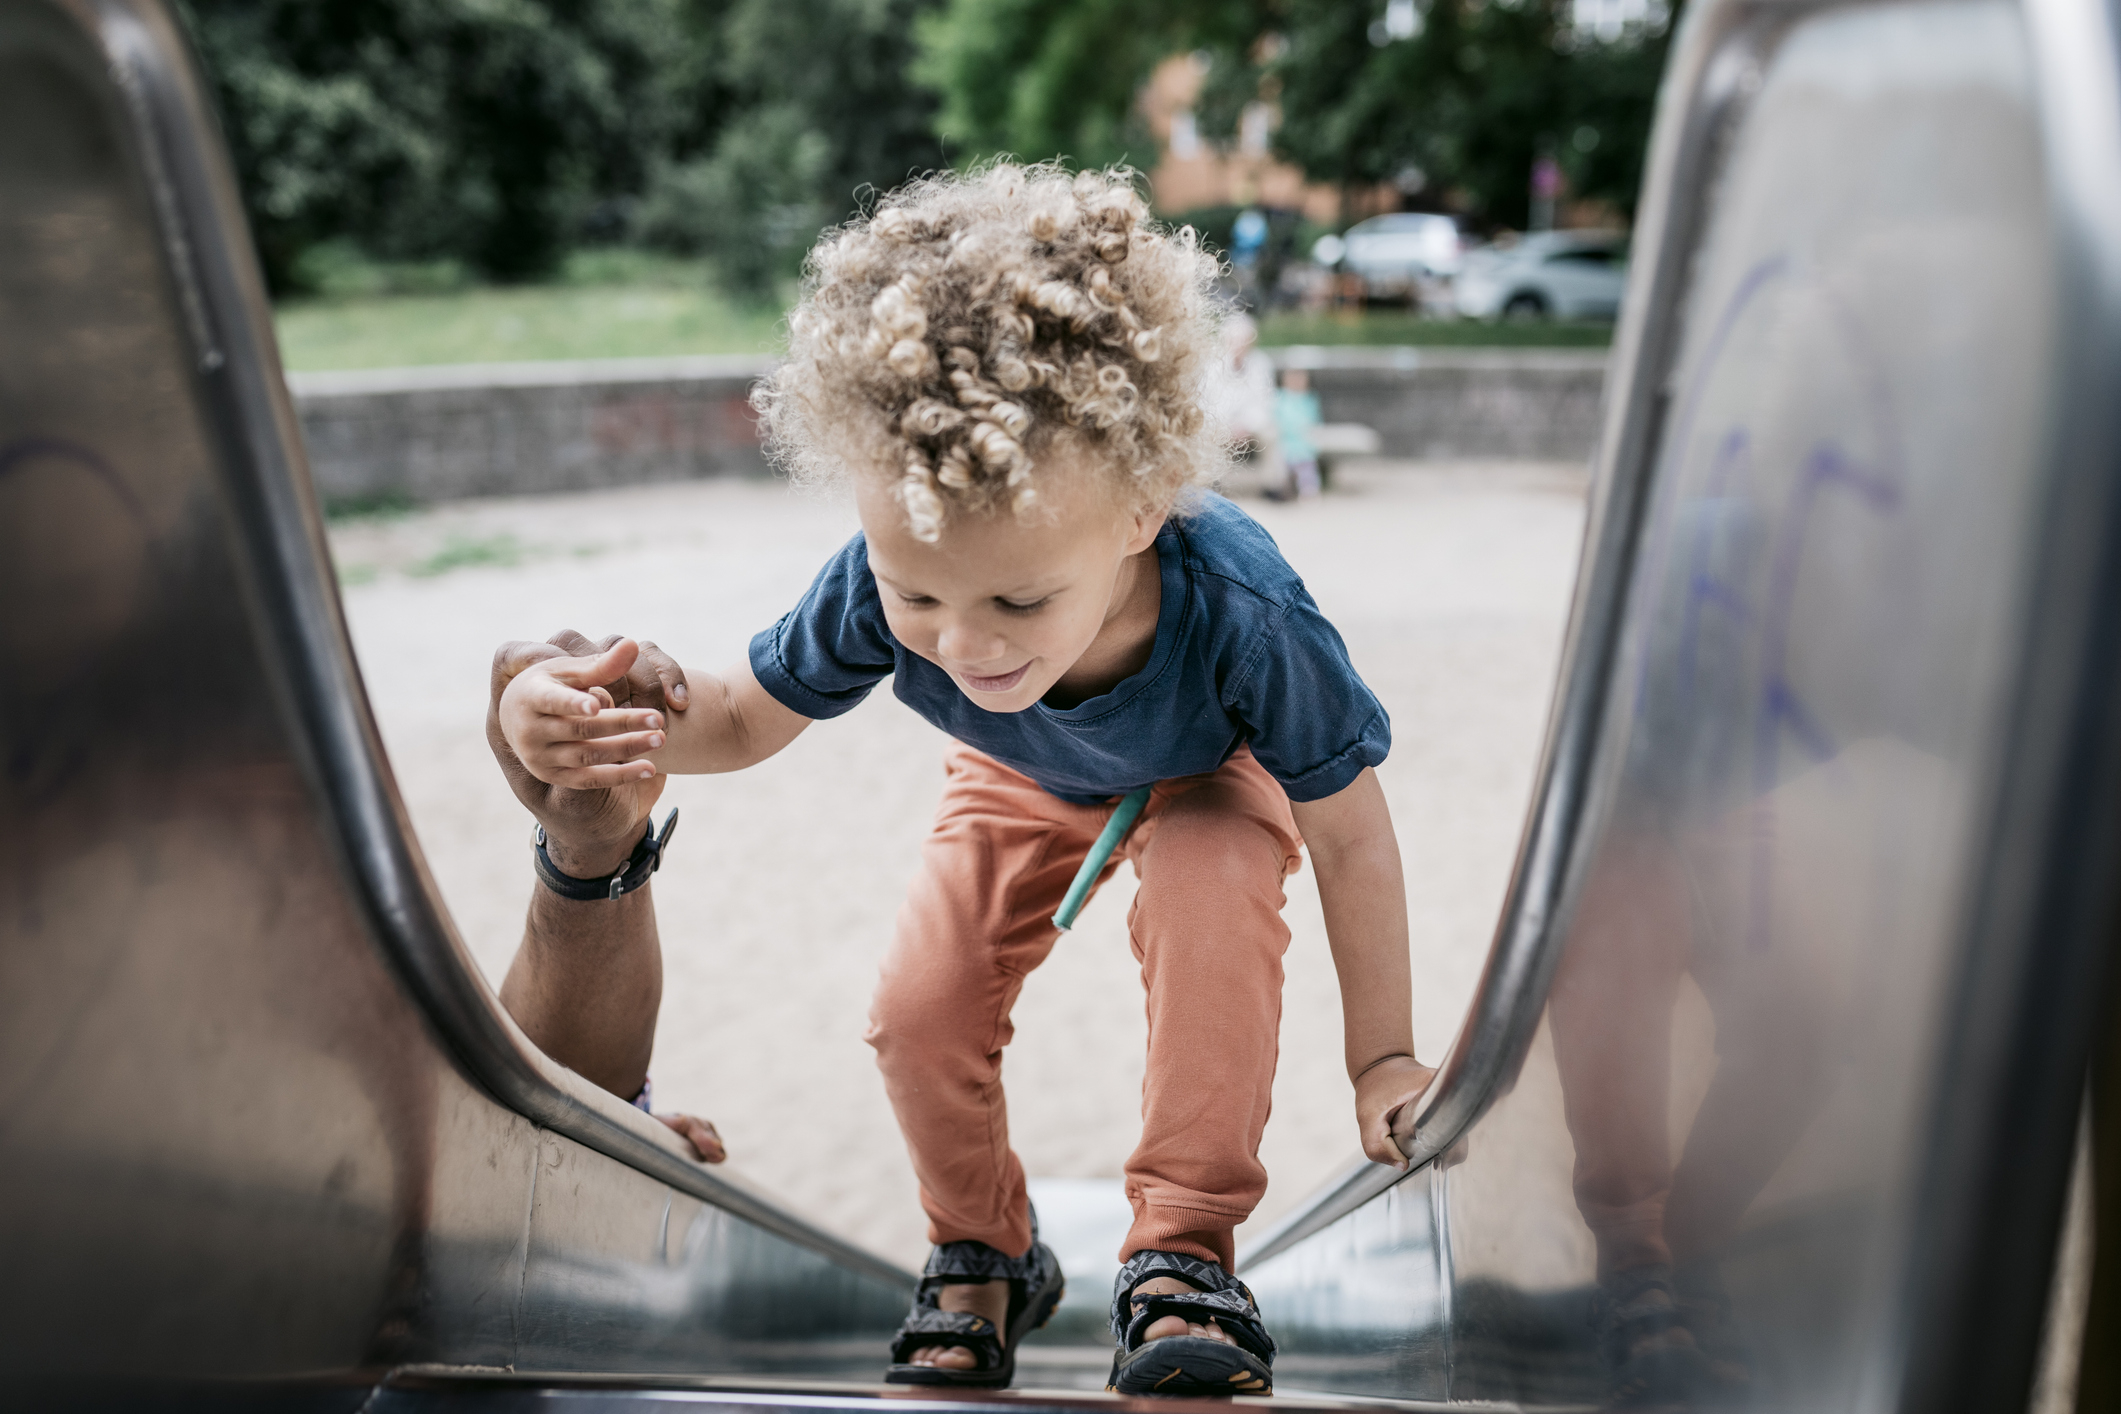 Child climbing up a slide at a playground